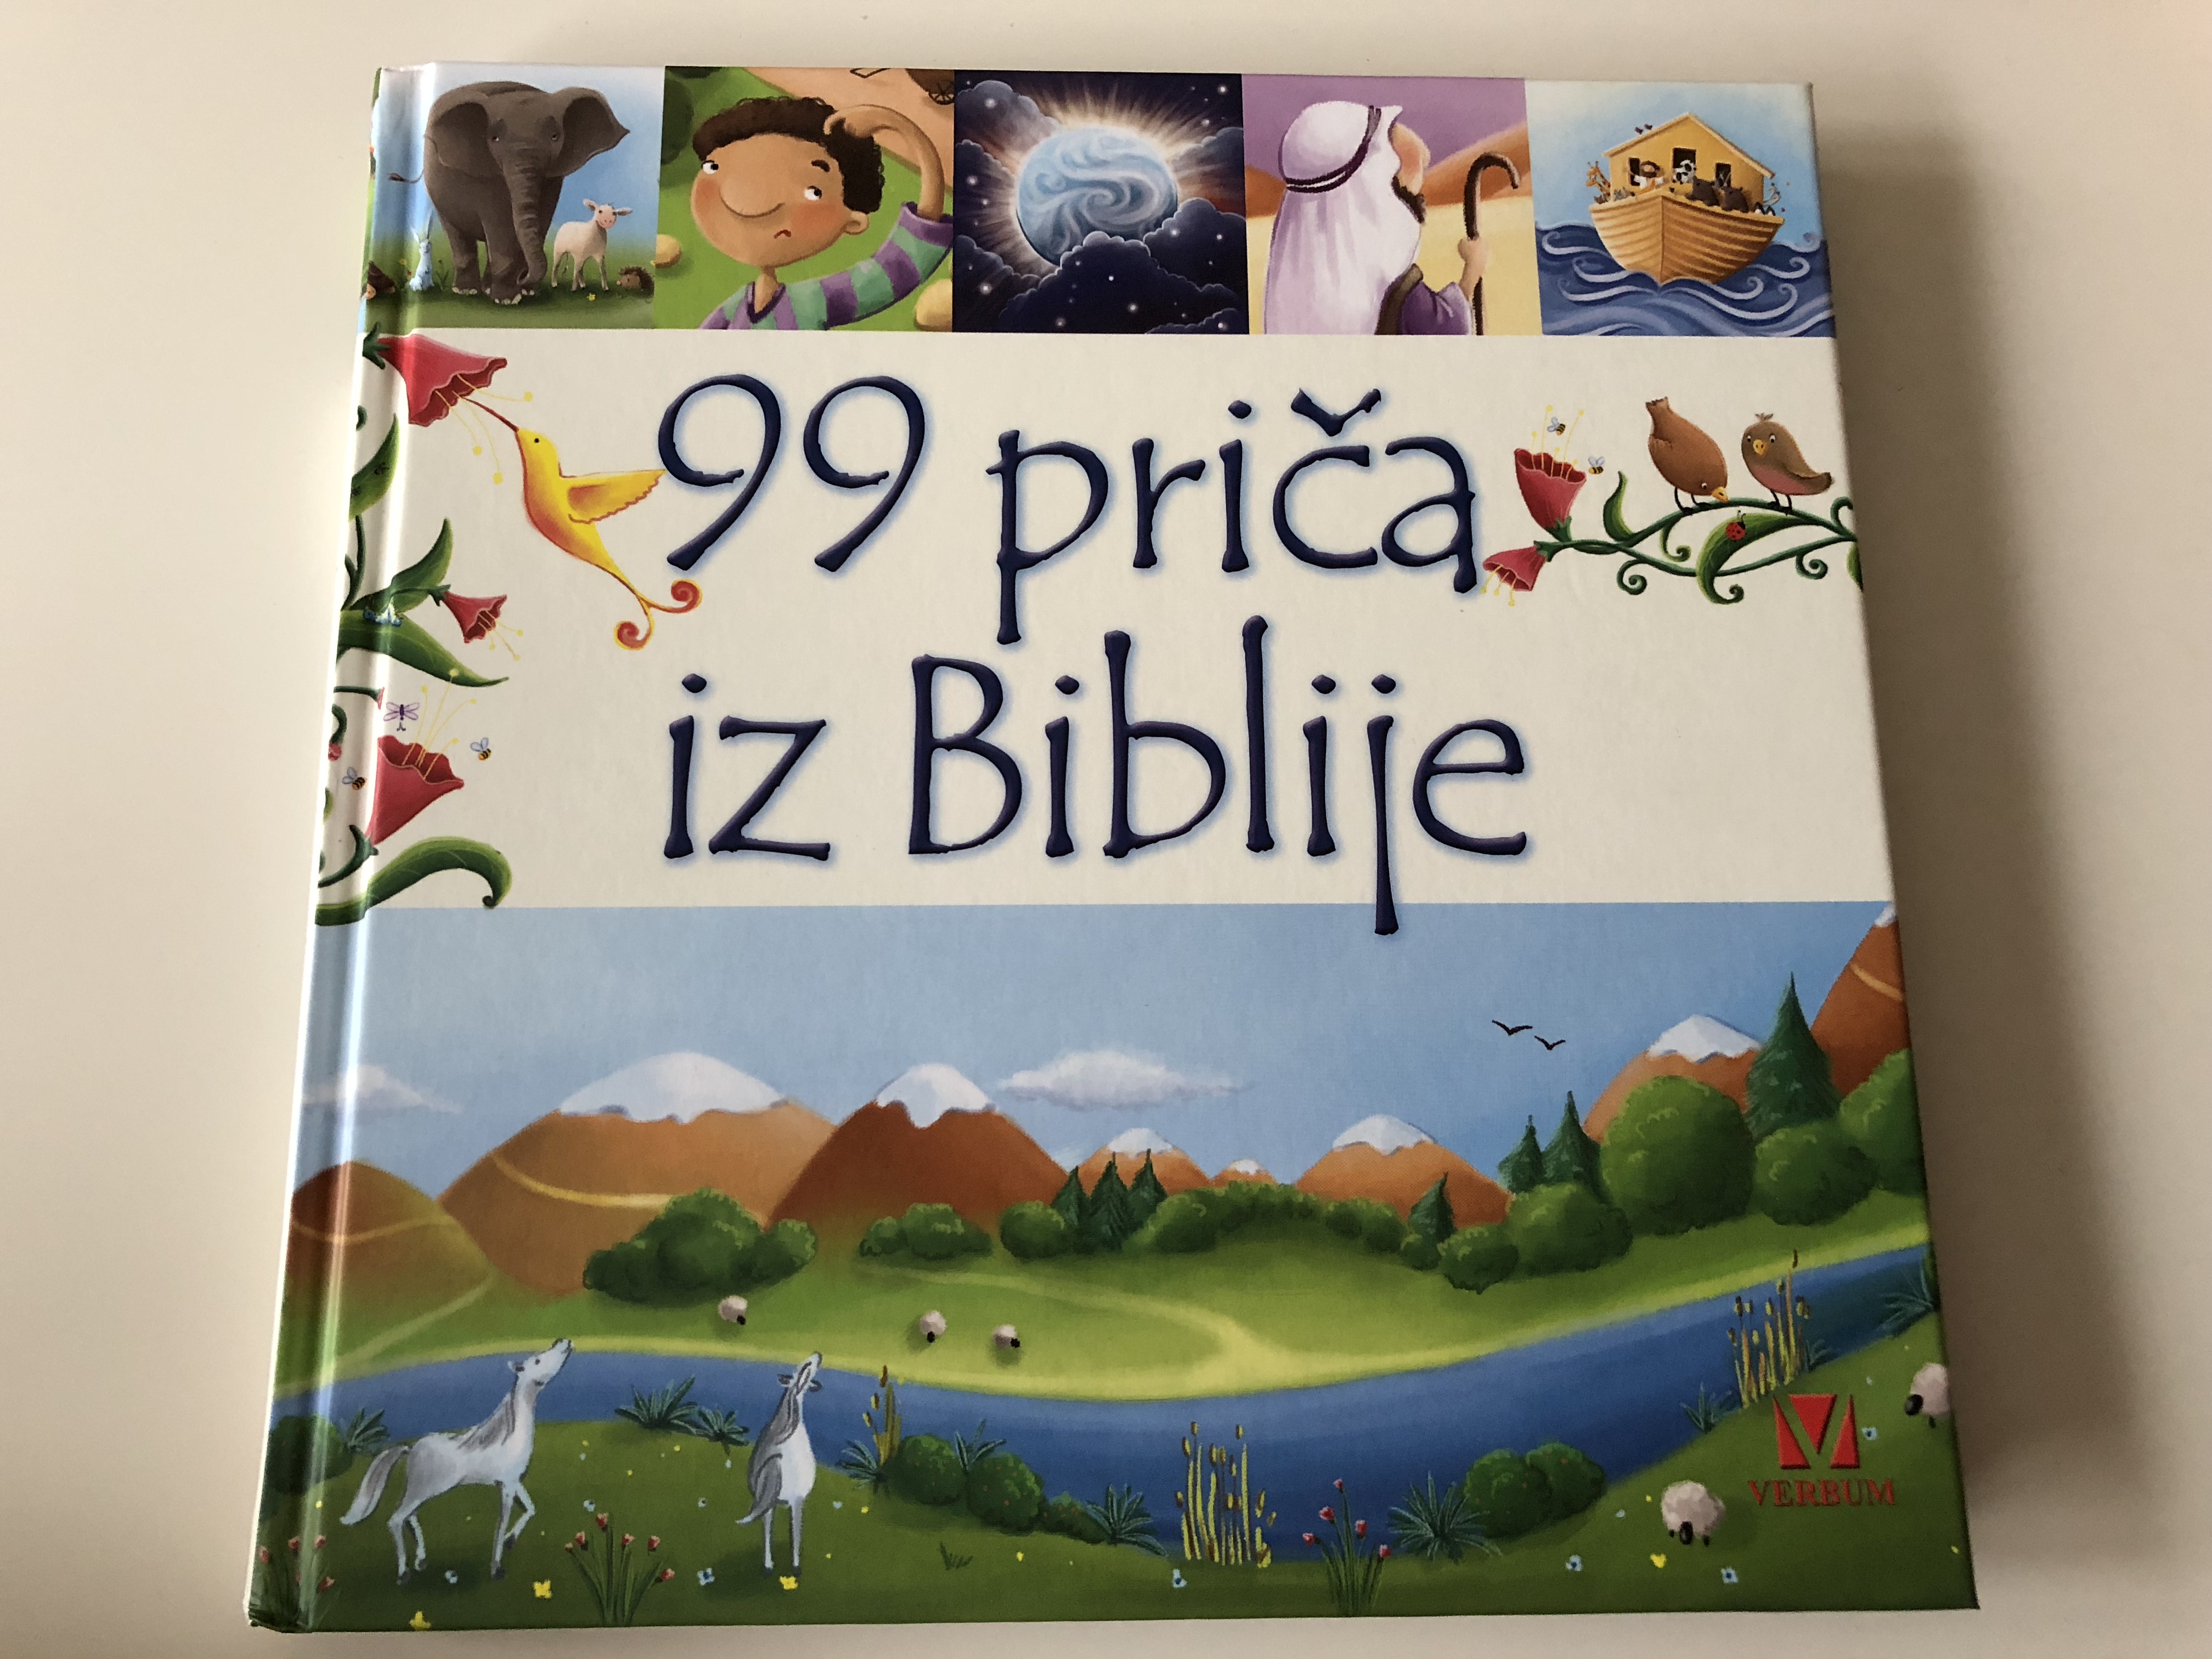 croatian-99-stories-from-the-bible-1-.jpg